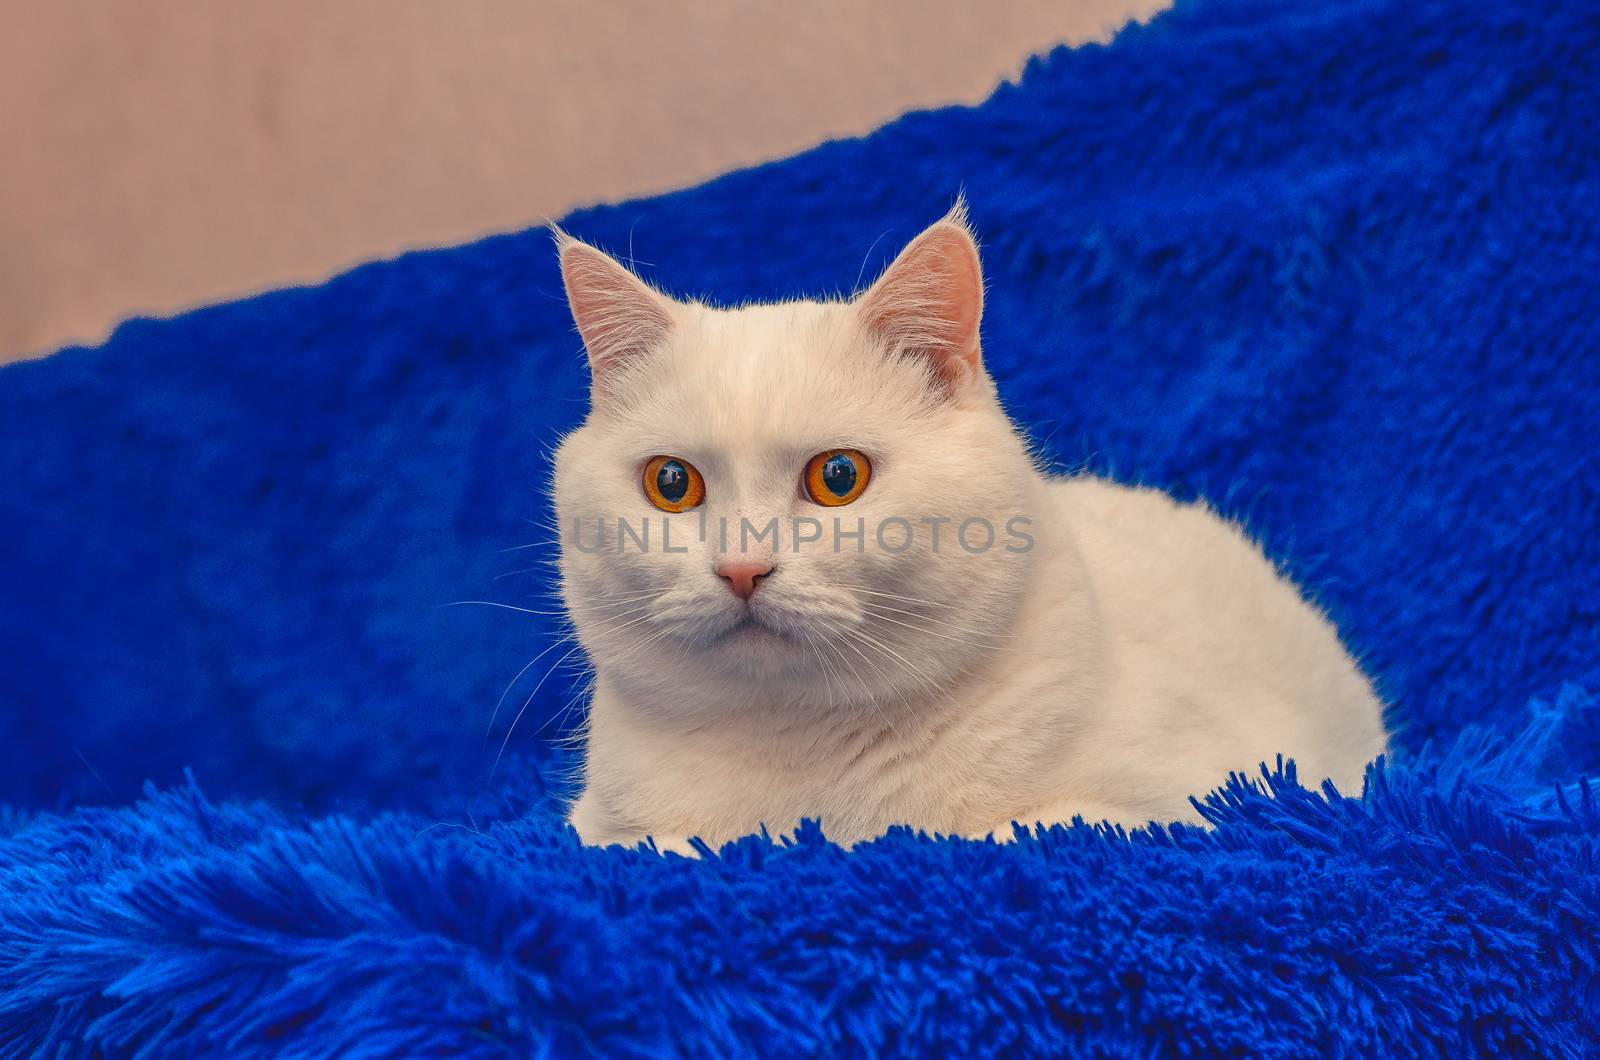 Beautiful White Cat with Yellow Eyes is sitting on a blue fluffy bedspread